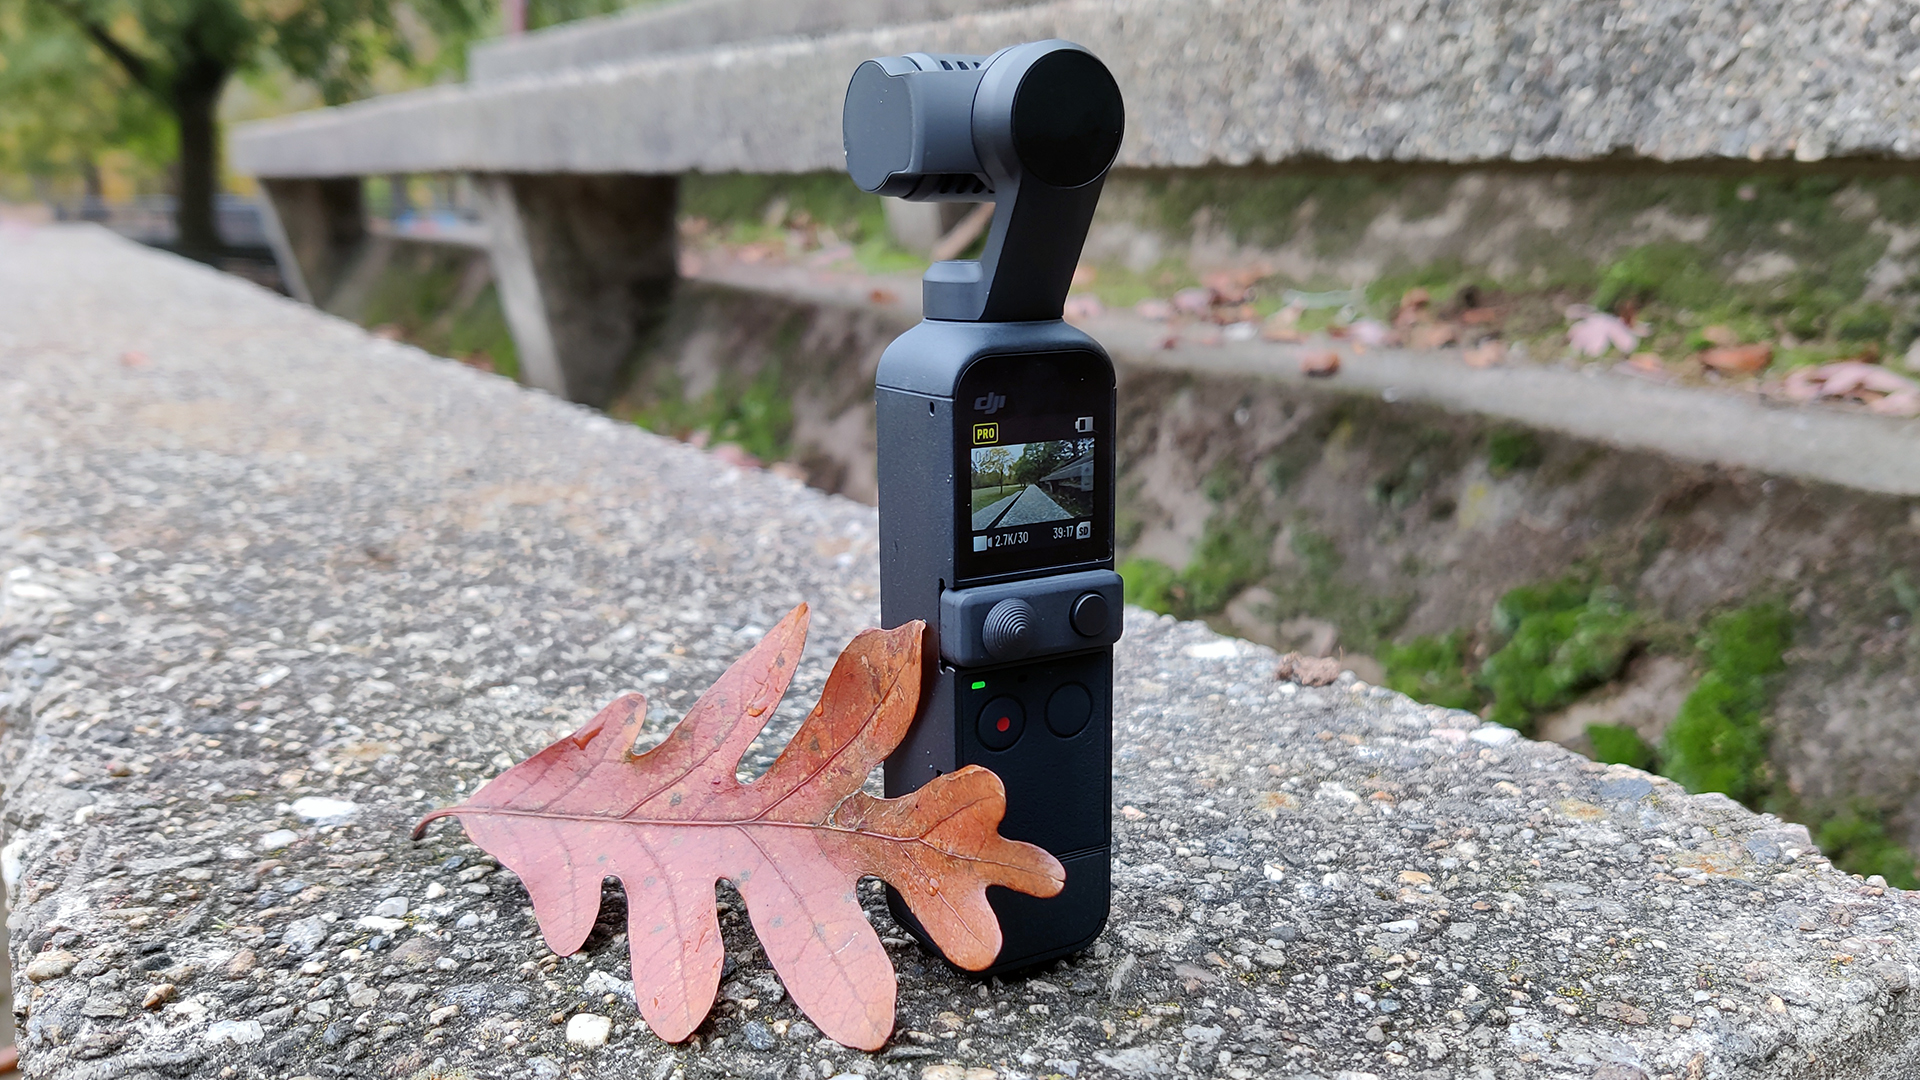 DJI Pocket 2 review: Better than original - Android Authority